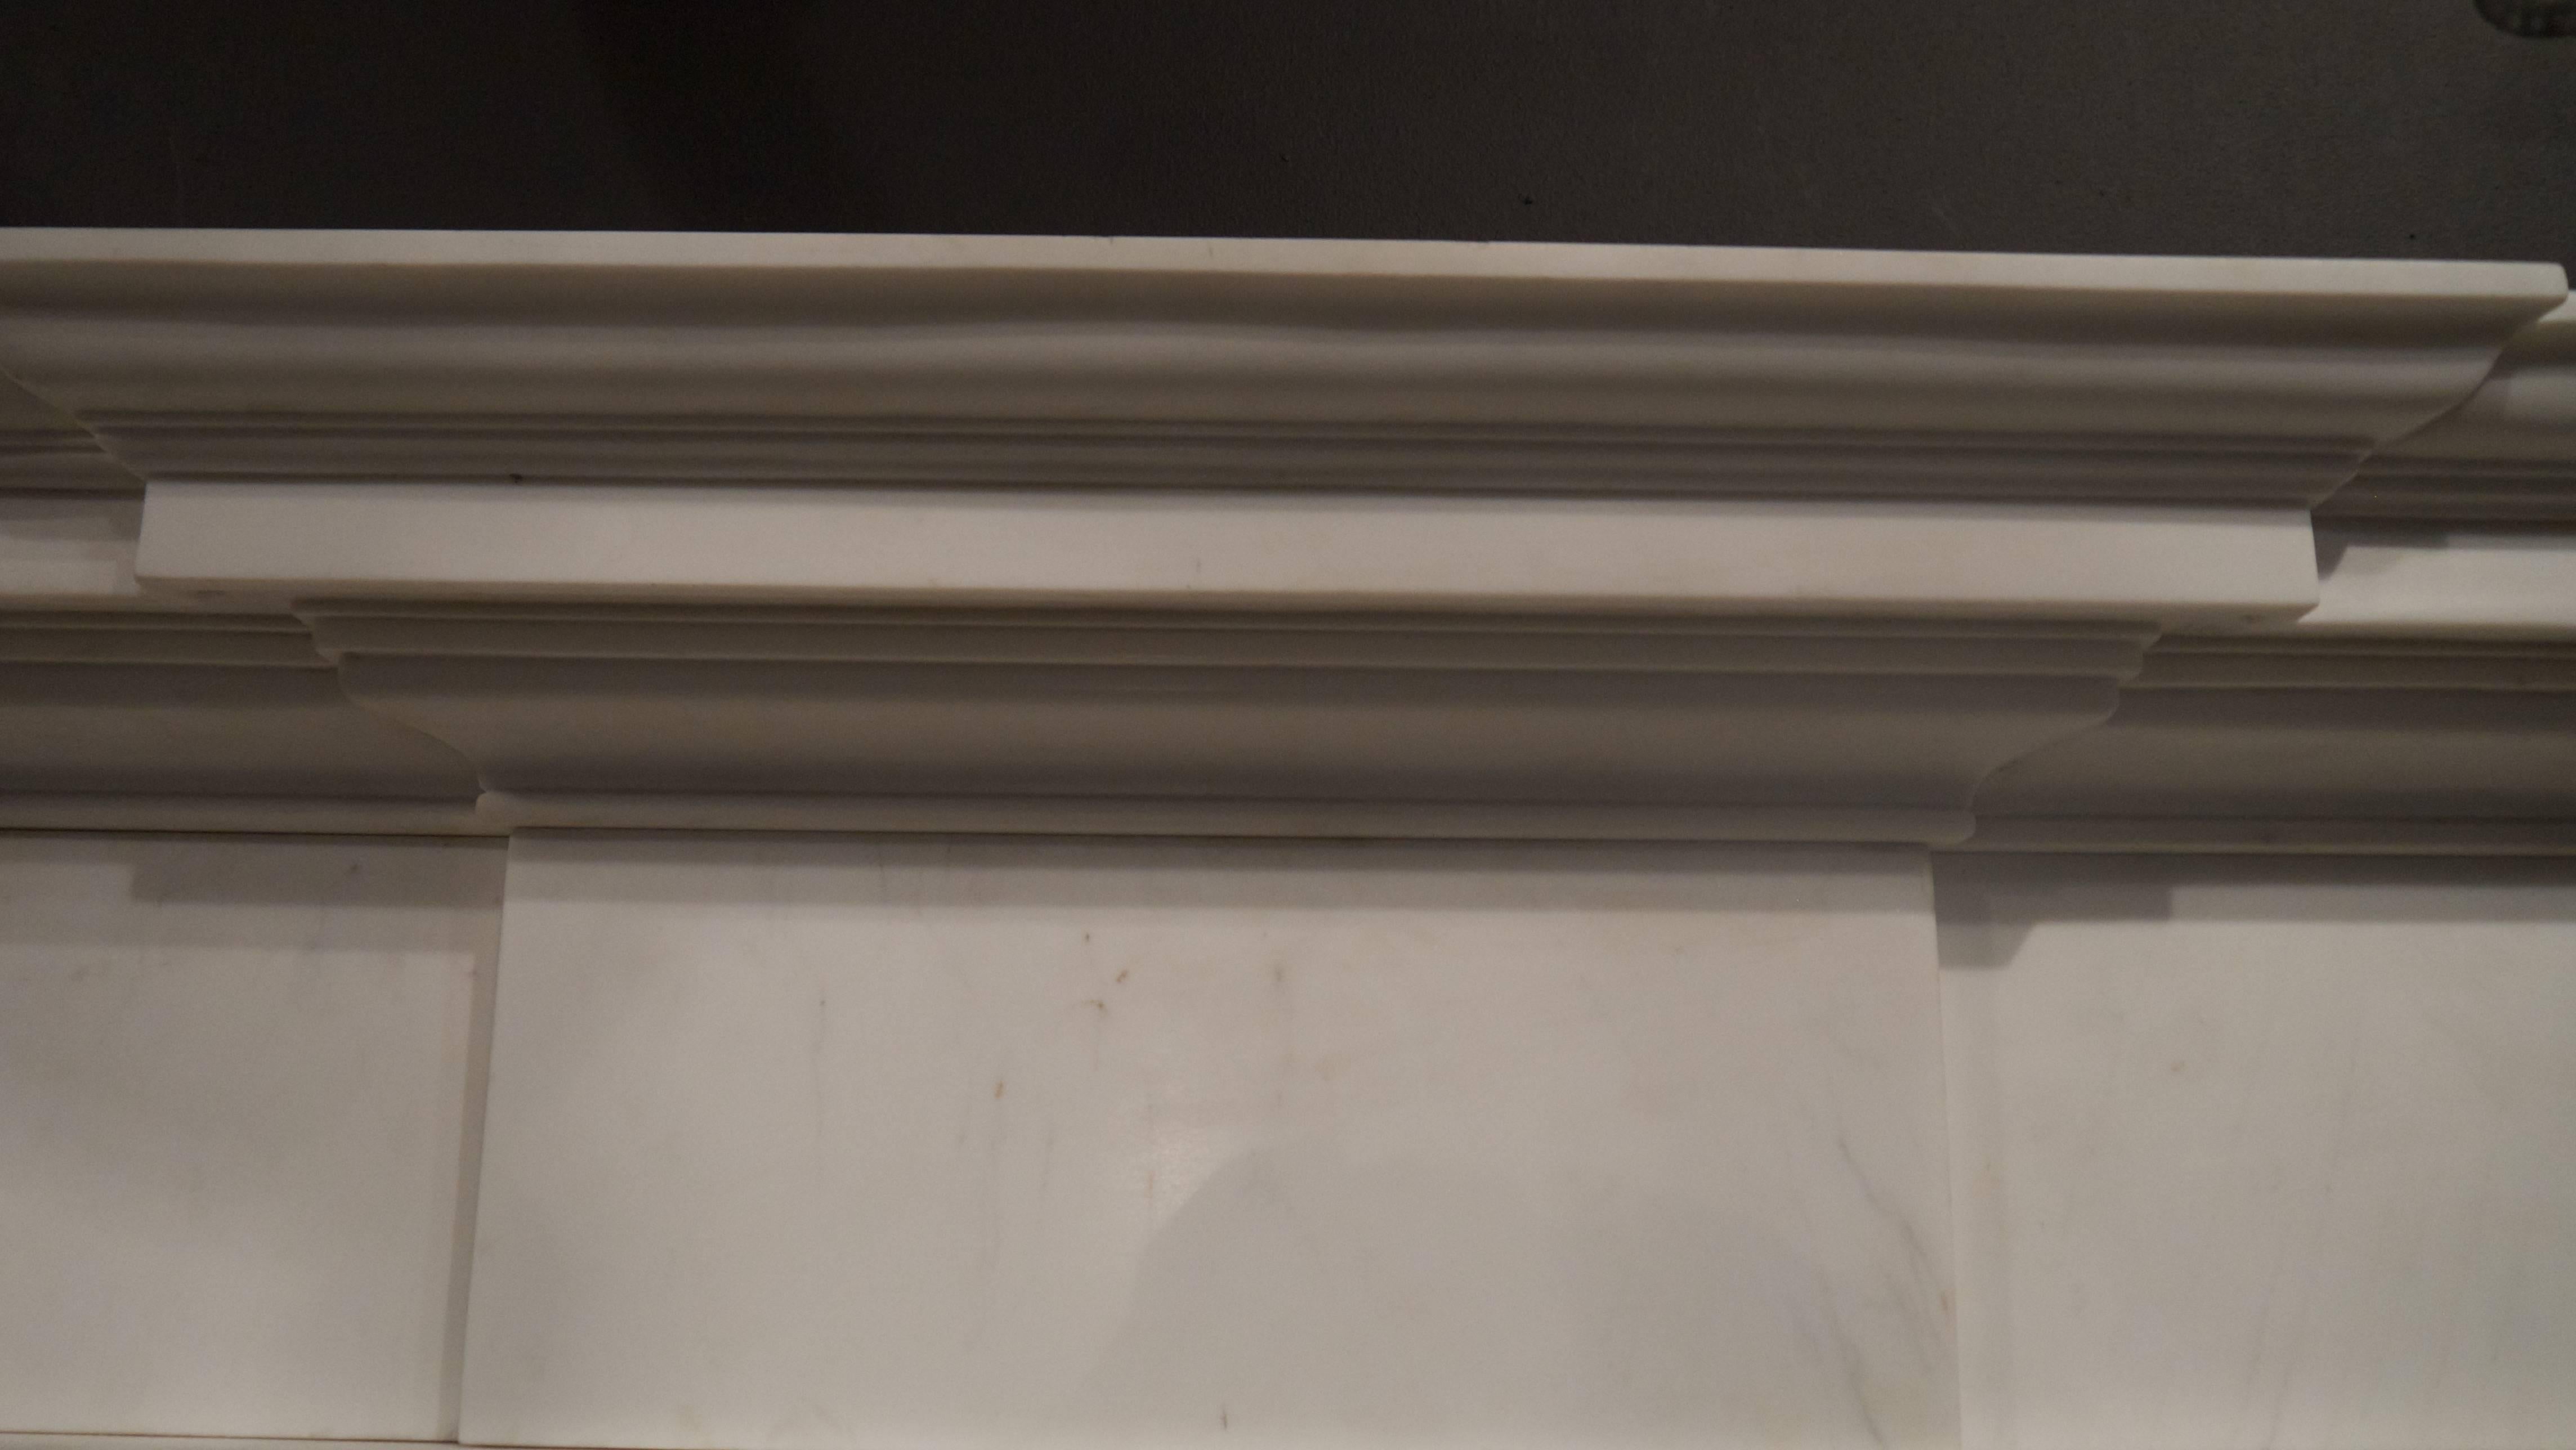 Reproduction statuary white Georgian style marble fireplace. One of a pair. Opening measures 40 x 40.